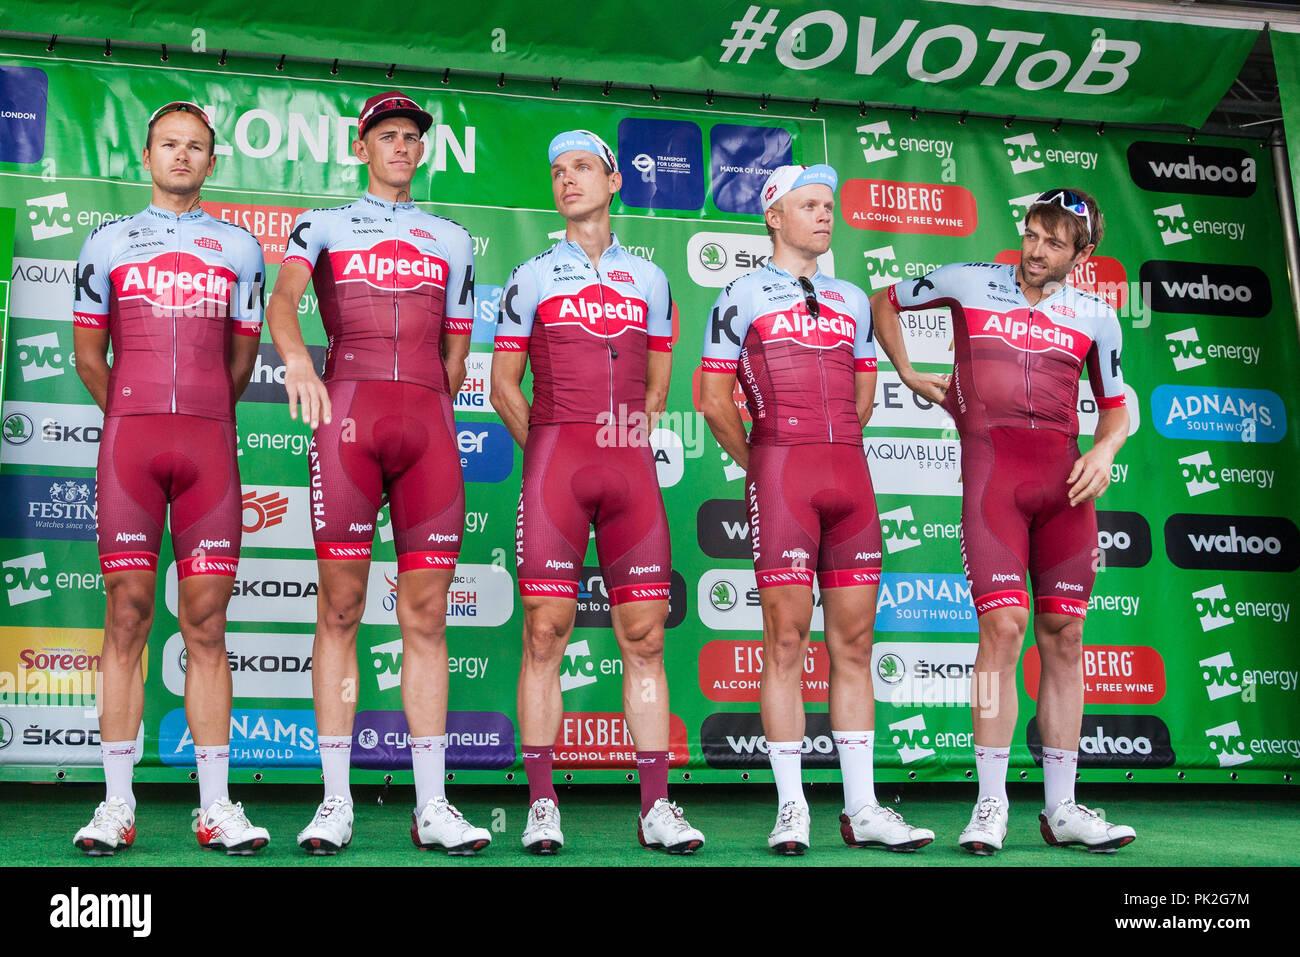 London, UK. 9th September, 2018. Riders from Team KATUSHA ALPECIN are presented before the 77km London Stage (Stage 8) of the OVO Energy Tour of Britain cycle race. Credit: Mark Kerrison/Alamy Live News Stock Photo